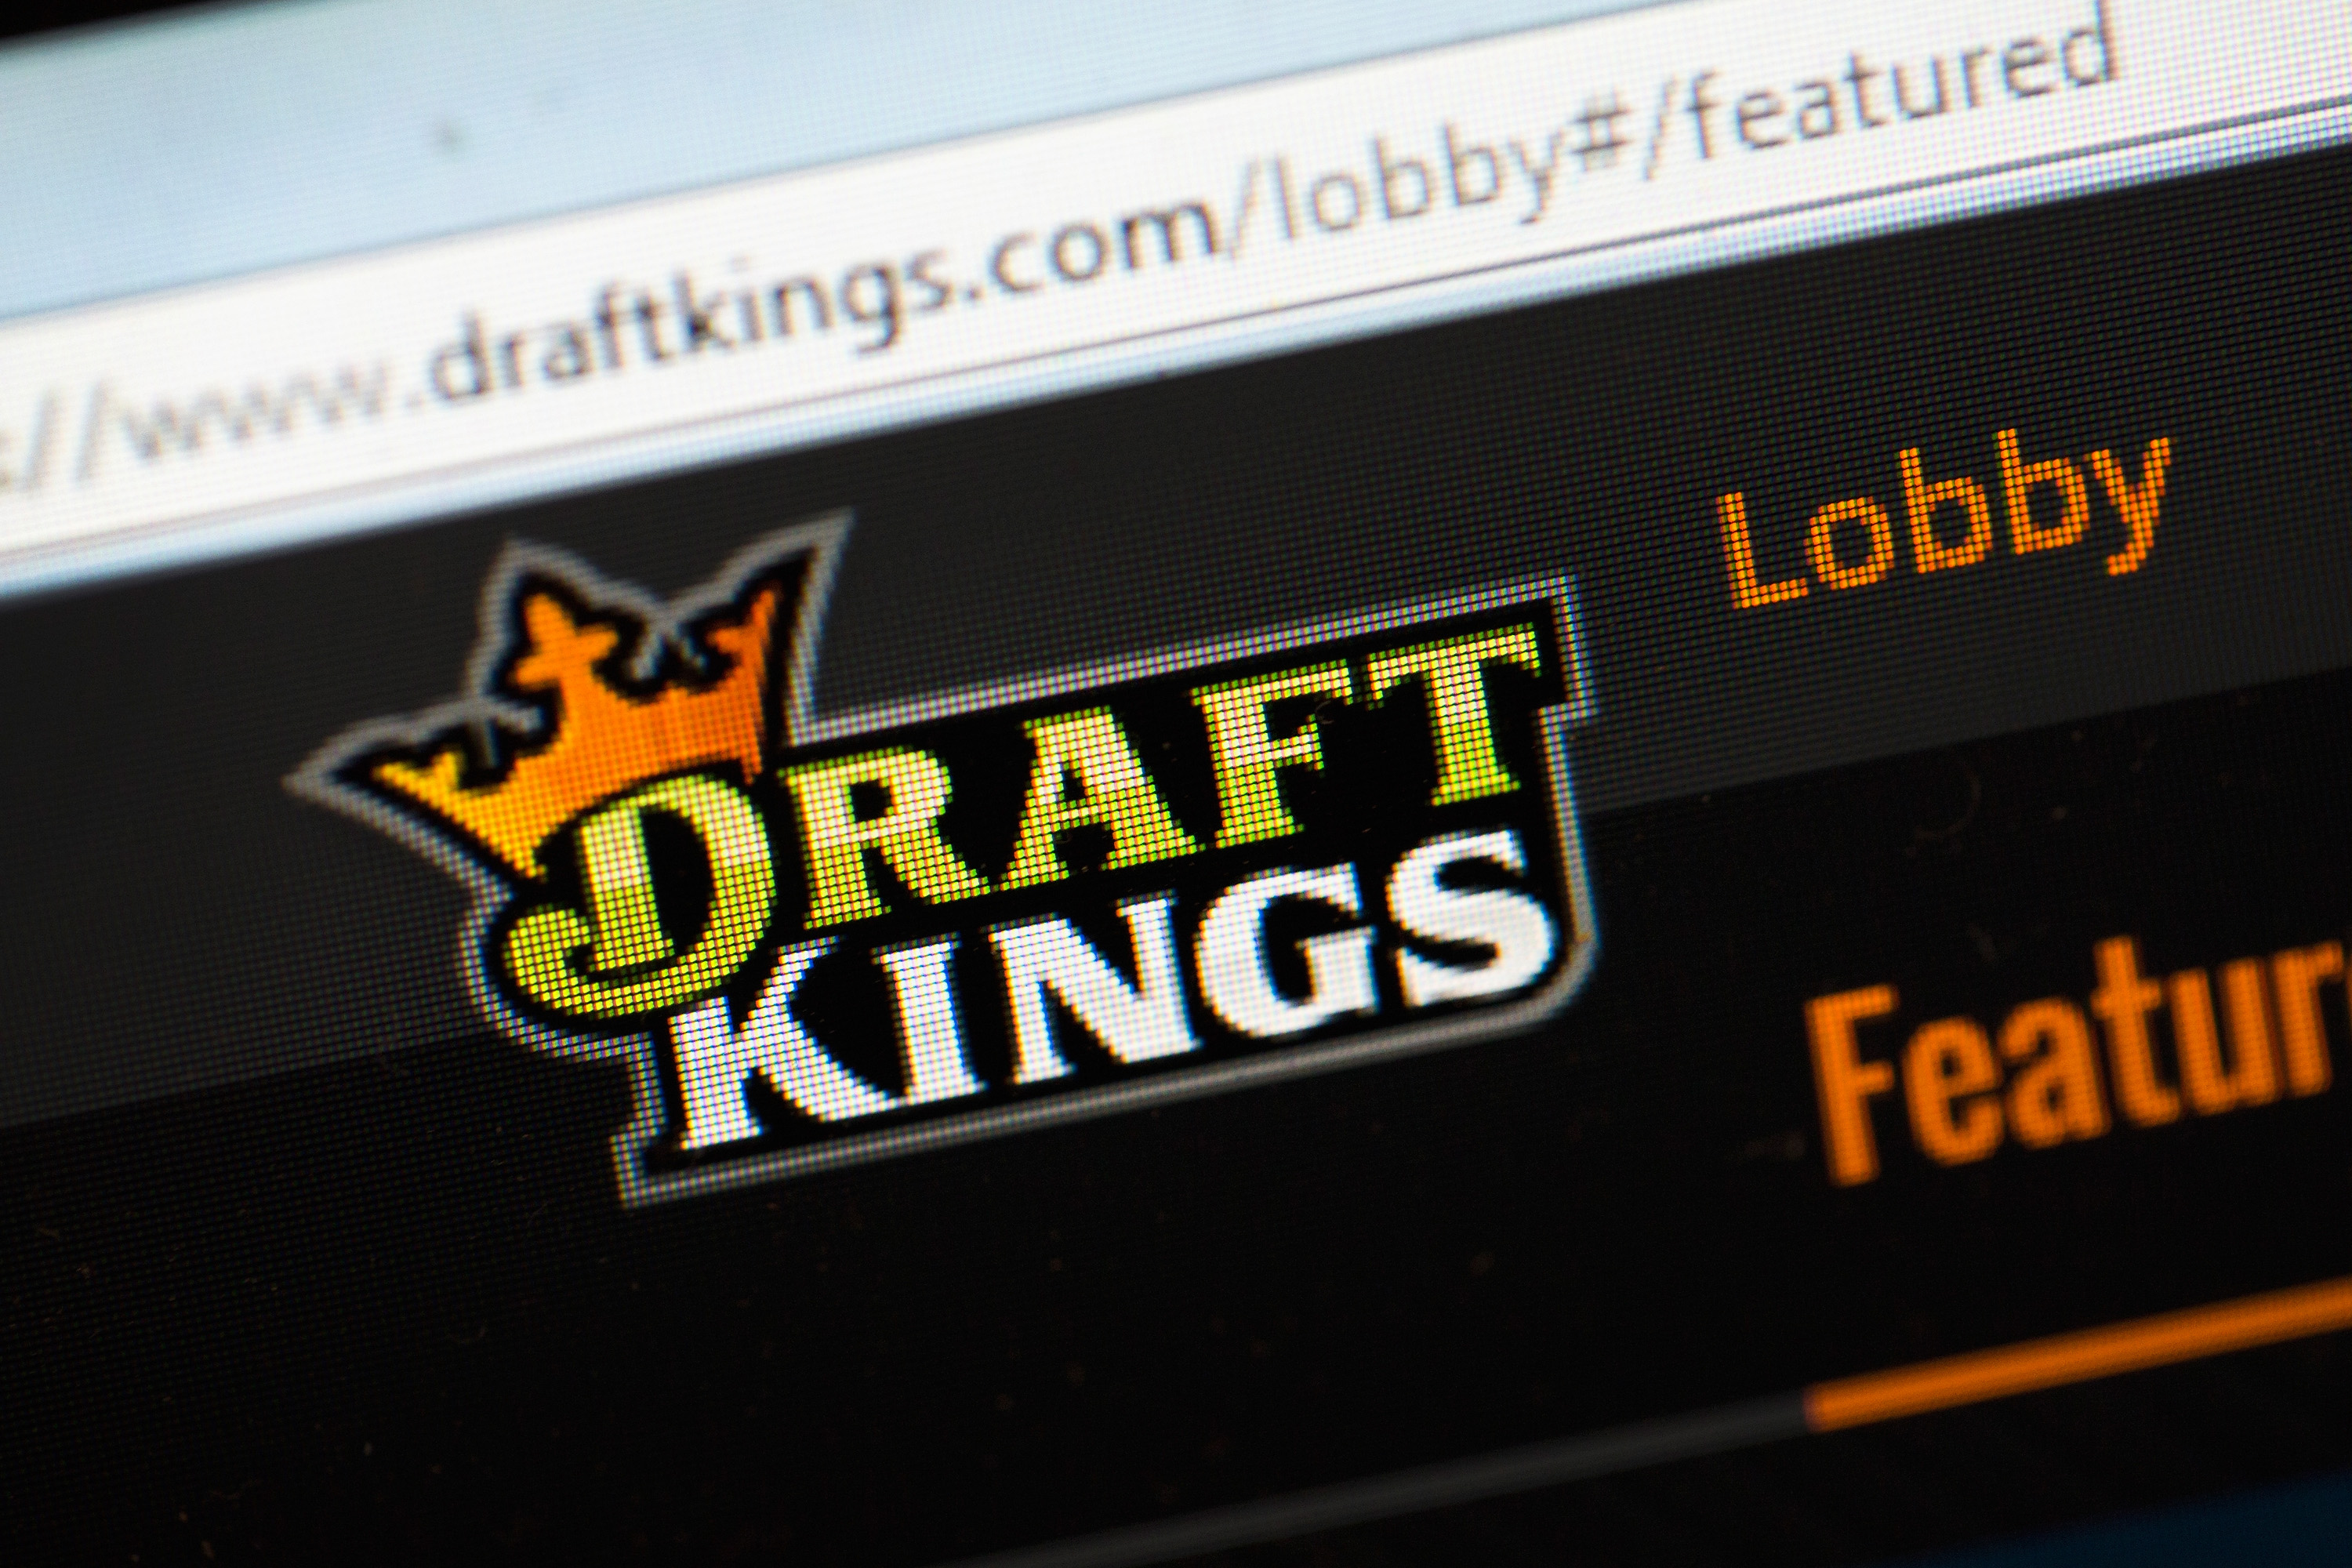 The fantasy sports website DraftKings is shown on October 16, 2015 in Chicago, Illinois. (Scott Olson&mdash;Getty Images)